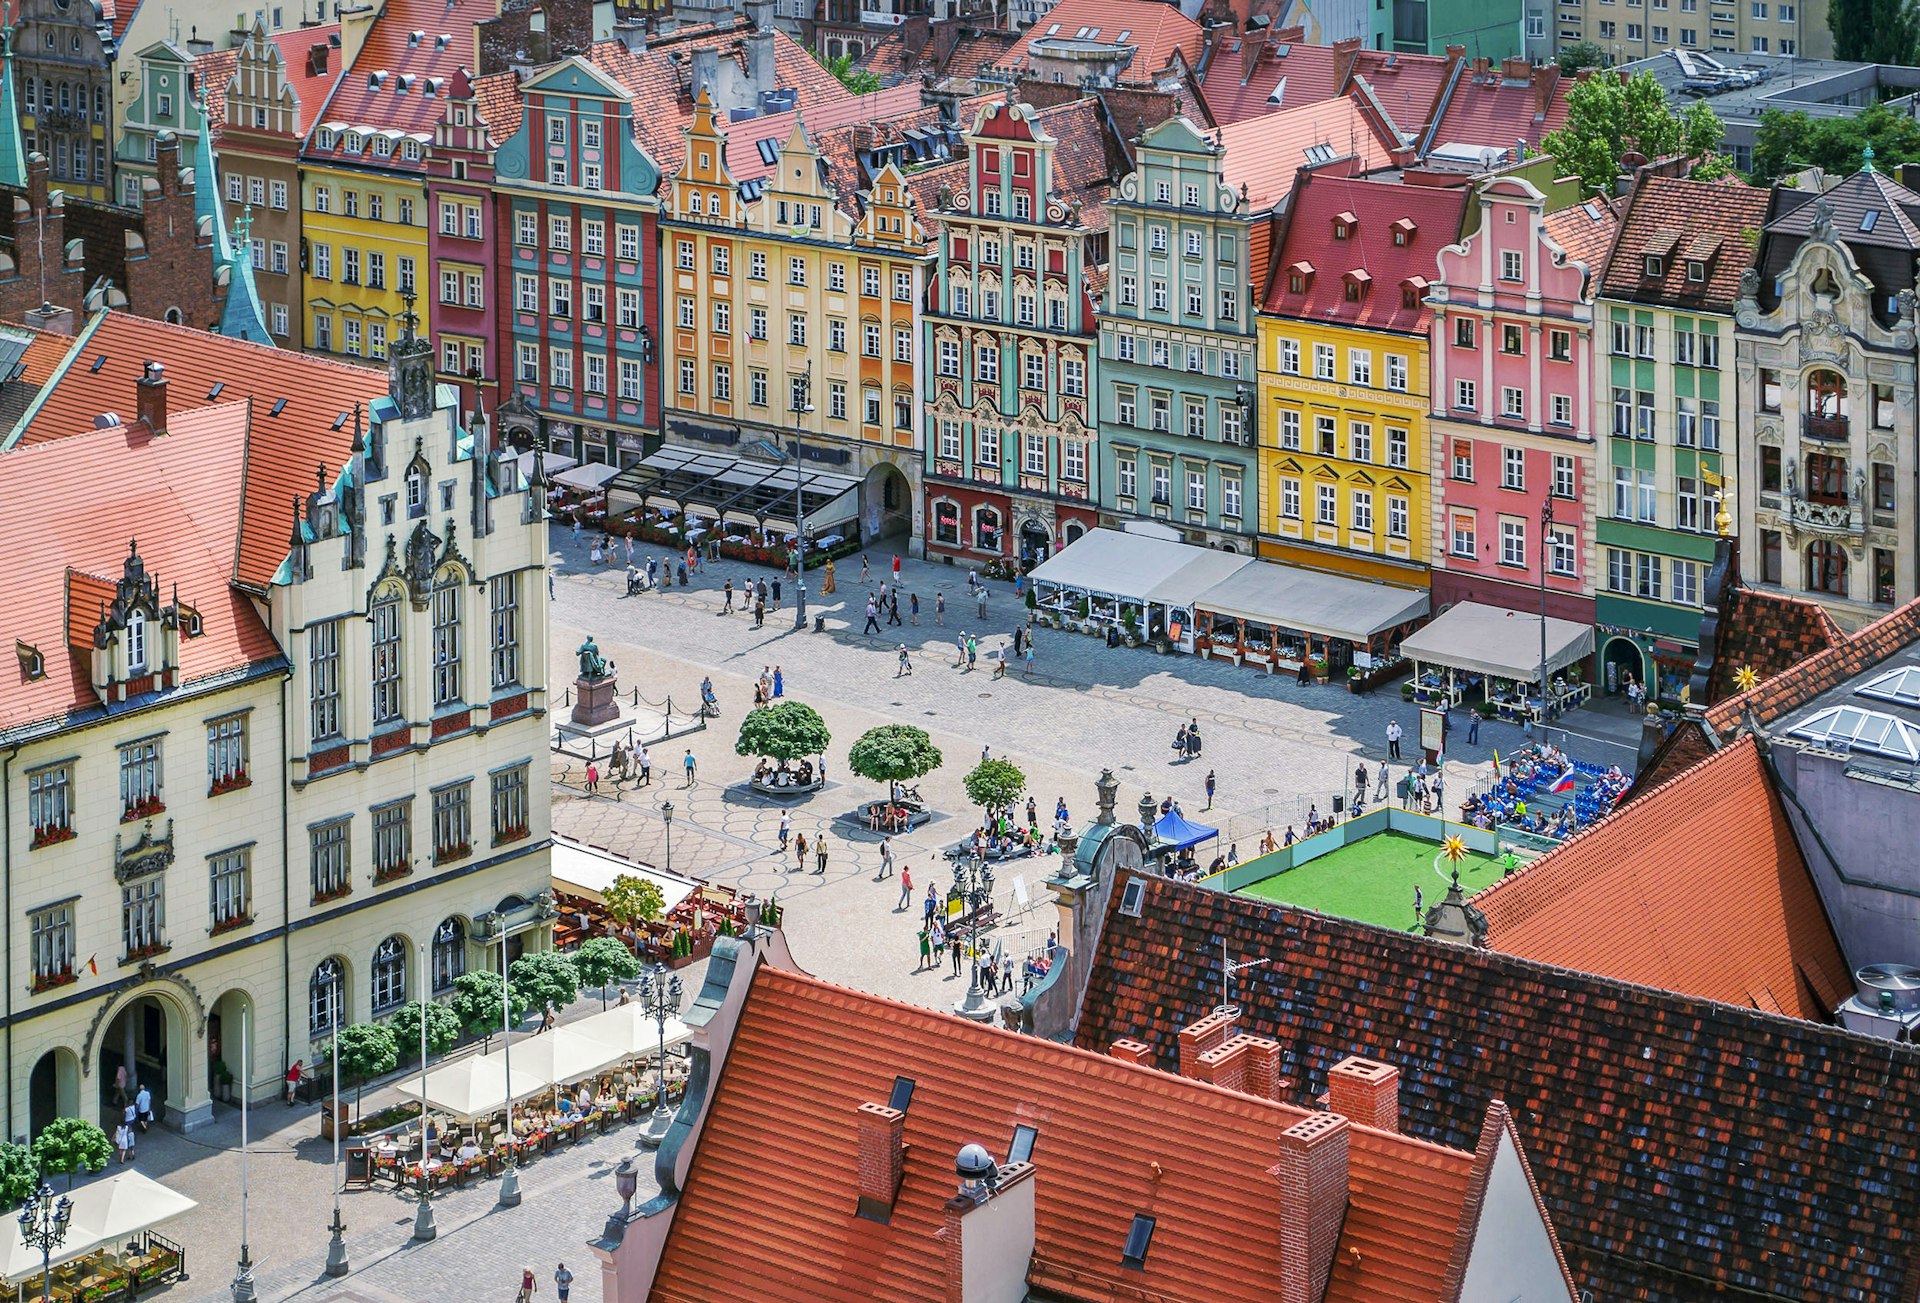 The market square in Wroclaw, Poland